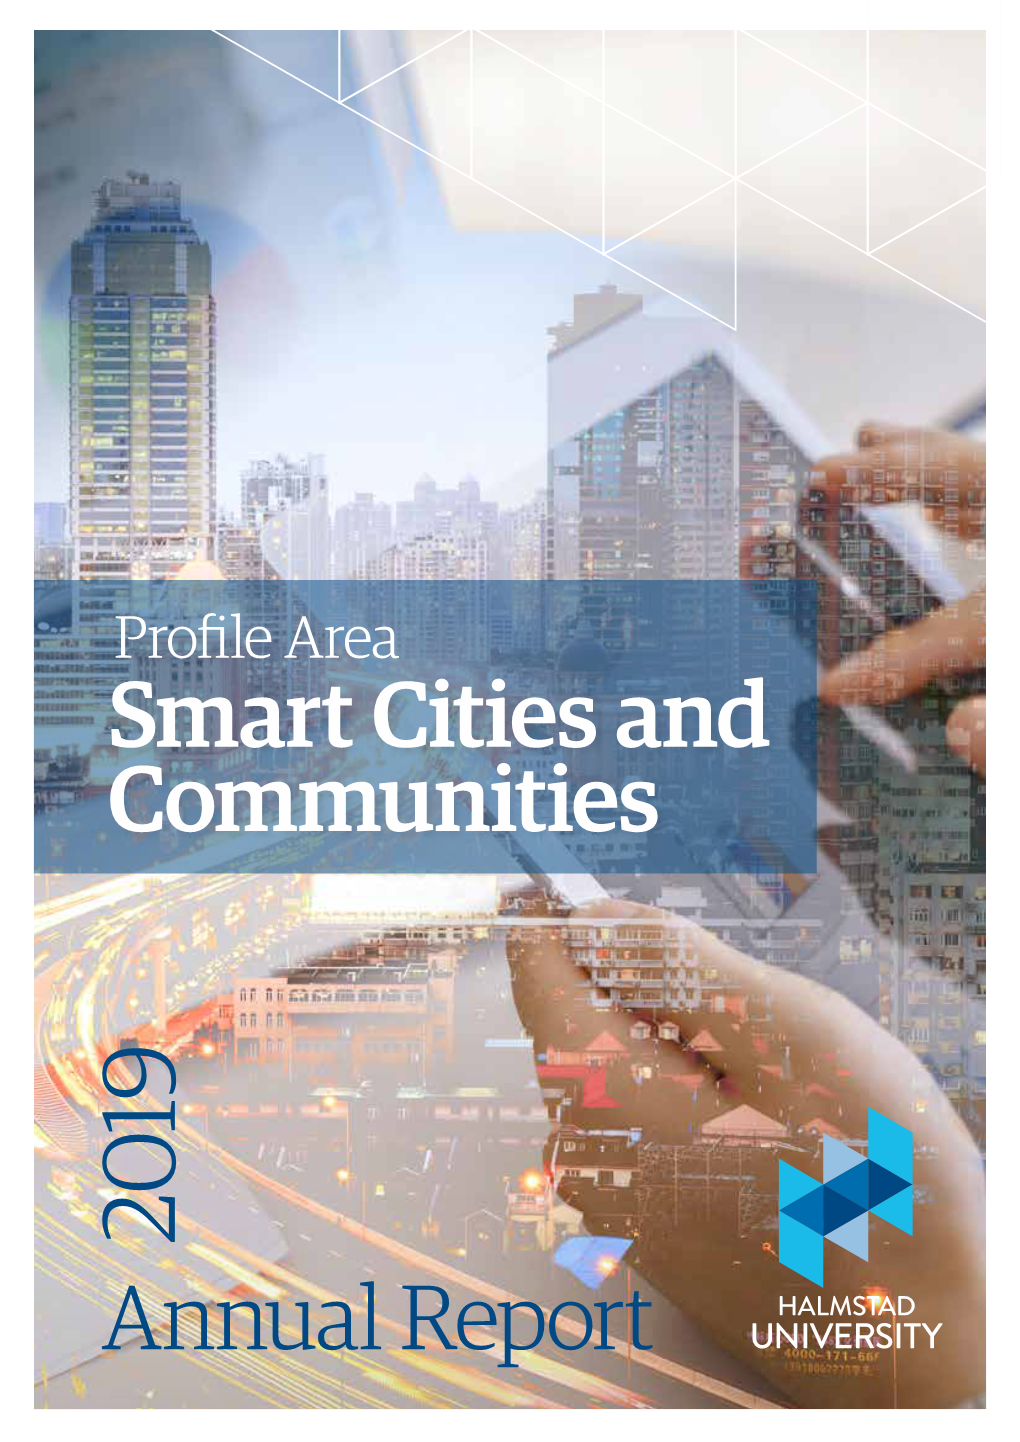 Smart Cities and Communities 2019 Annual Report